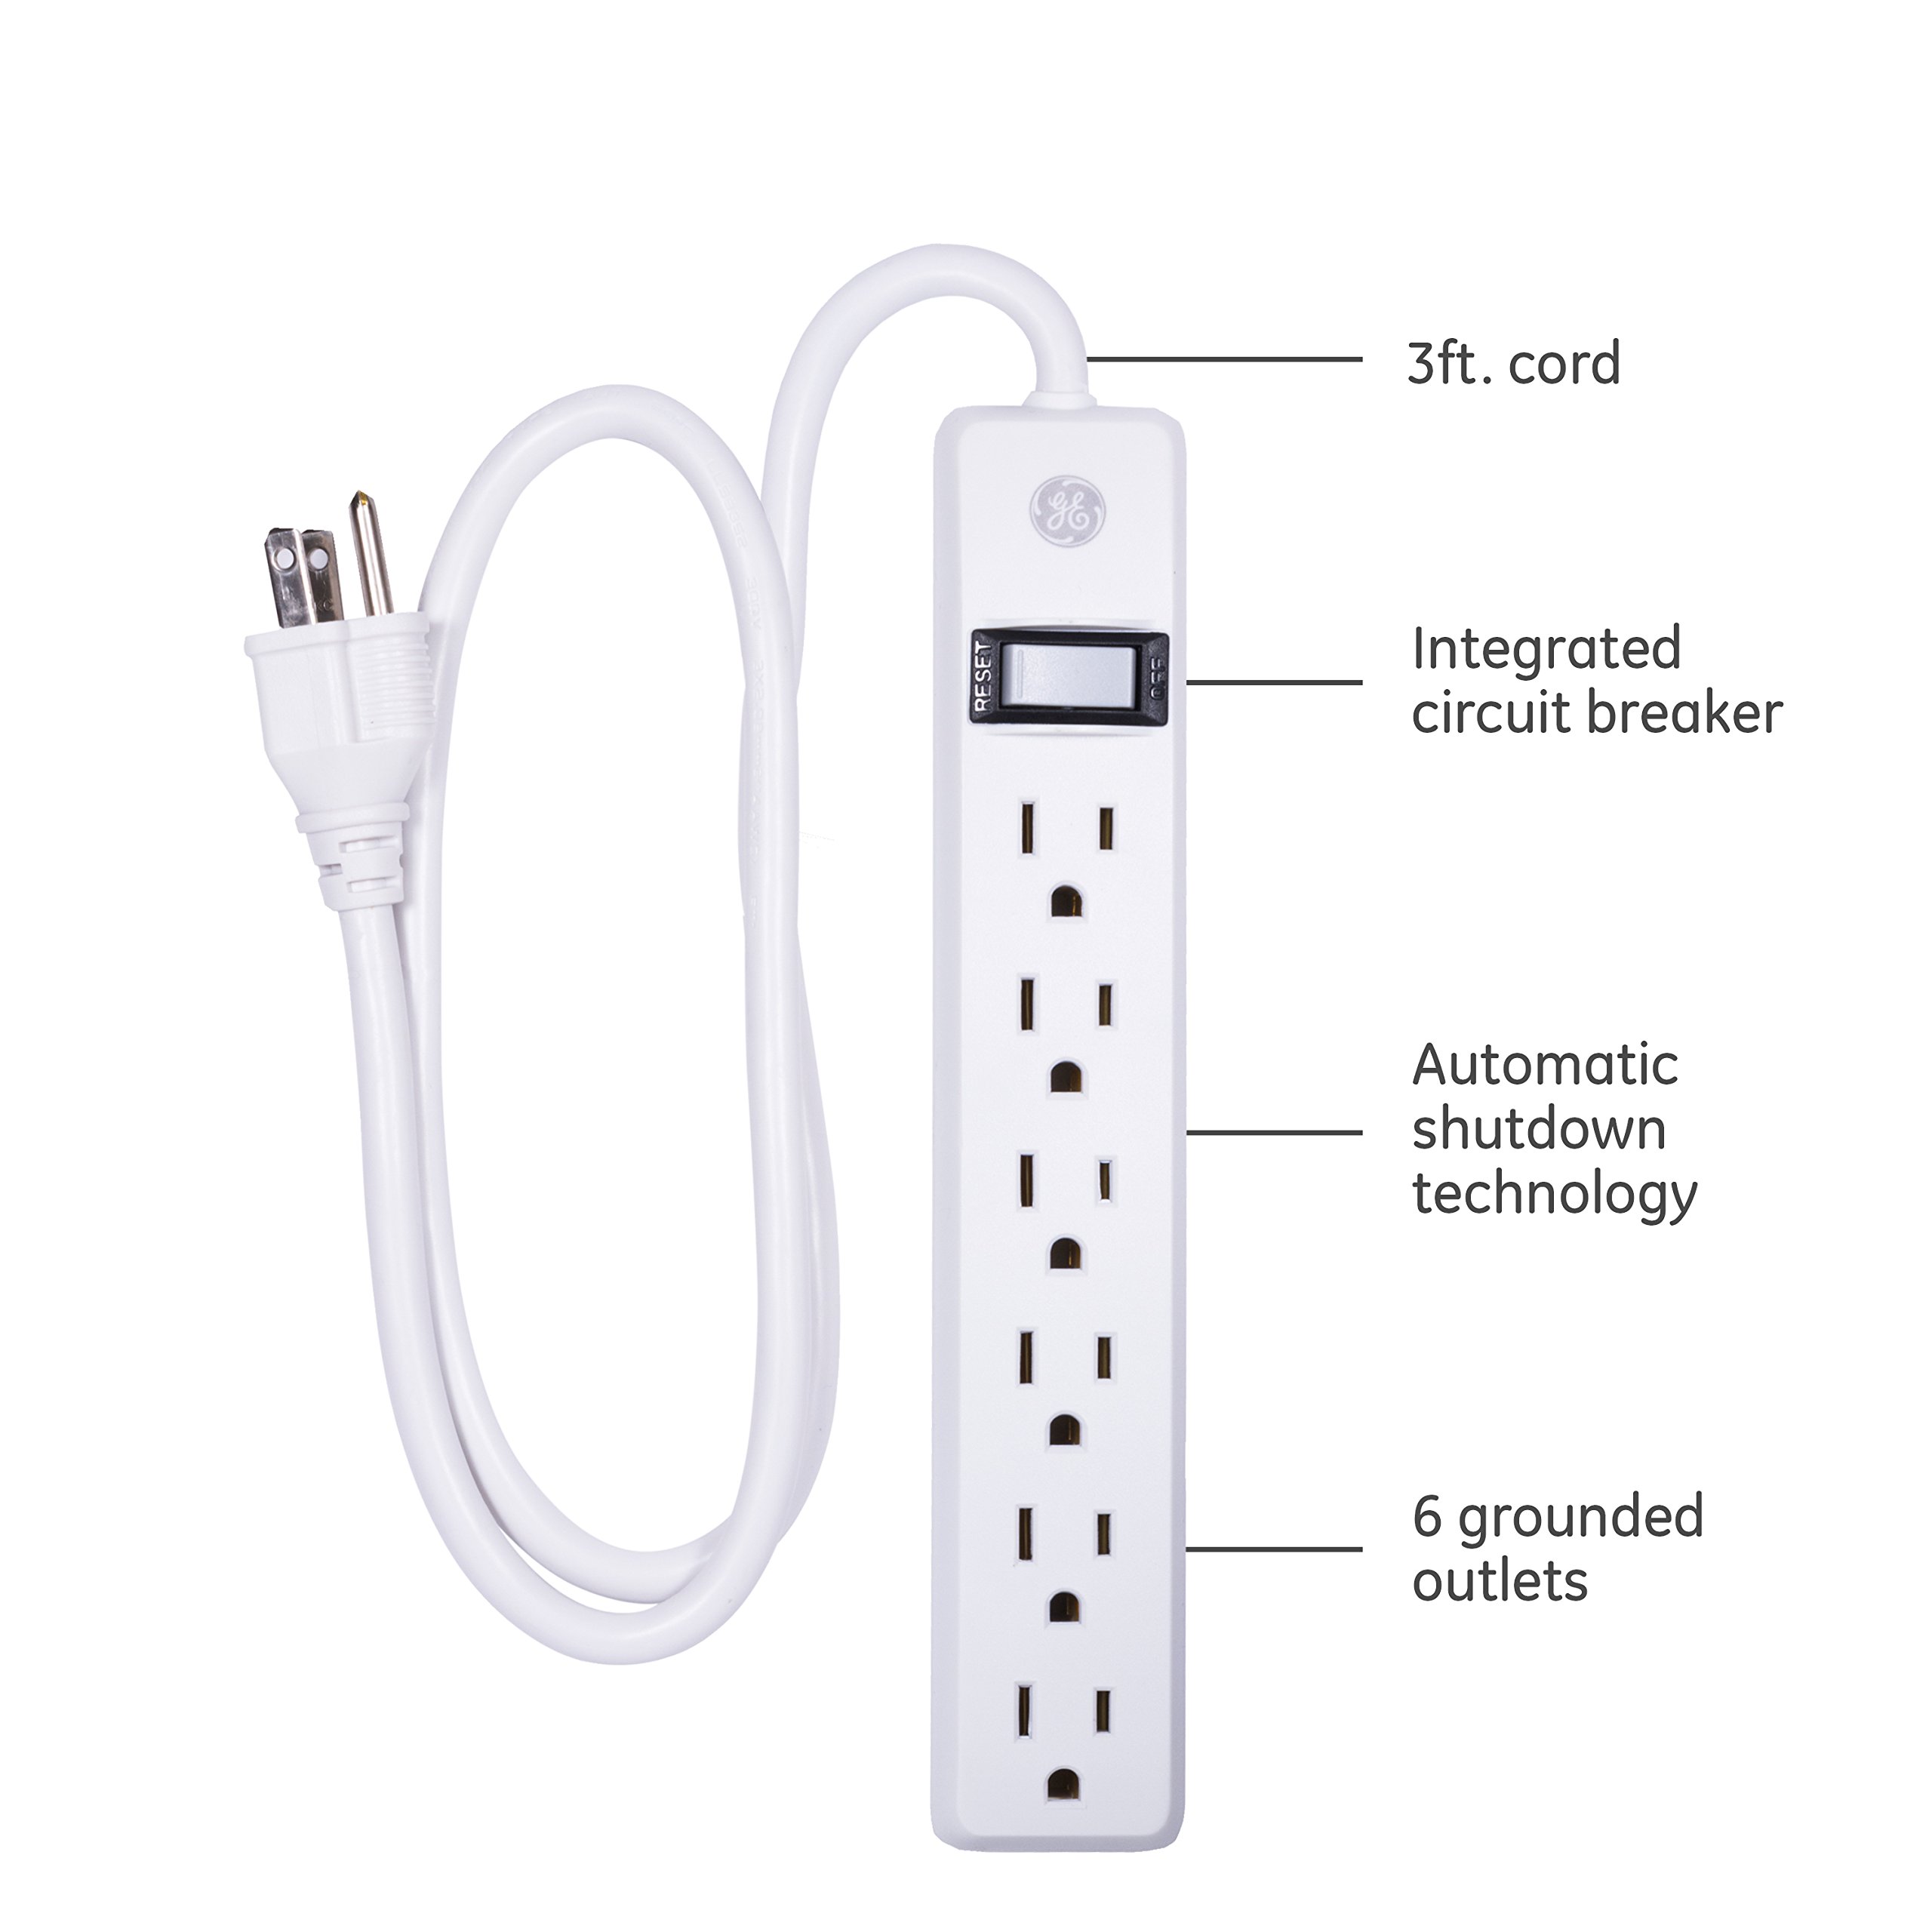 GE 6 Grounded Outlet Surge Protector, 450 Joules, 2 Pack Power Strip, 3 Ft Long Extension Cord & 3-Outlet Power Strip, 12 Ft Extension Cord, 2 Prong, 16 Gauge, Twist-to-Close Safety Outlet Covers